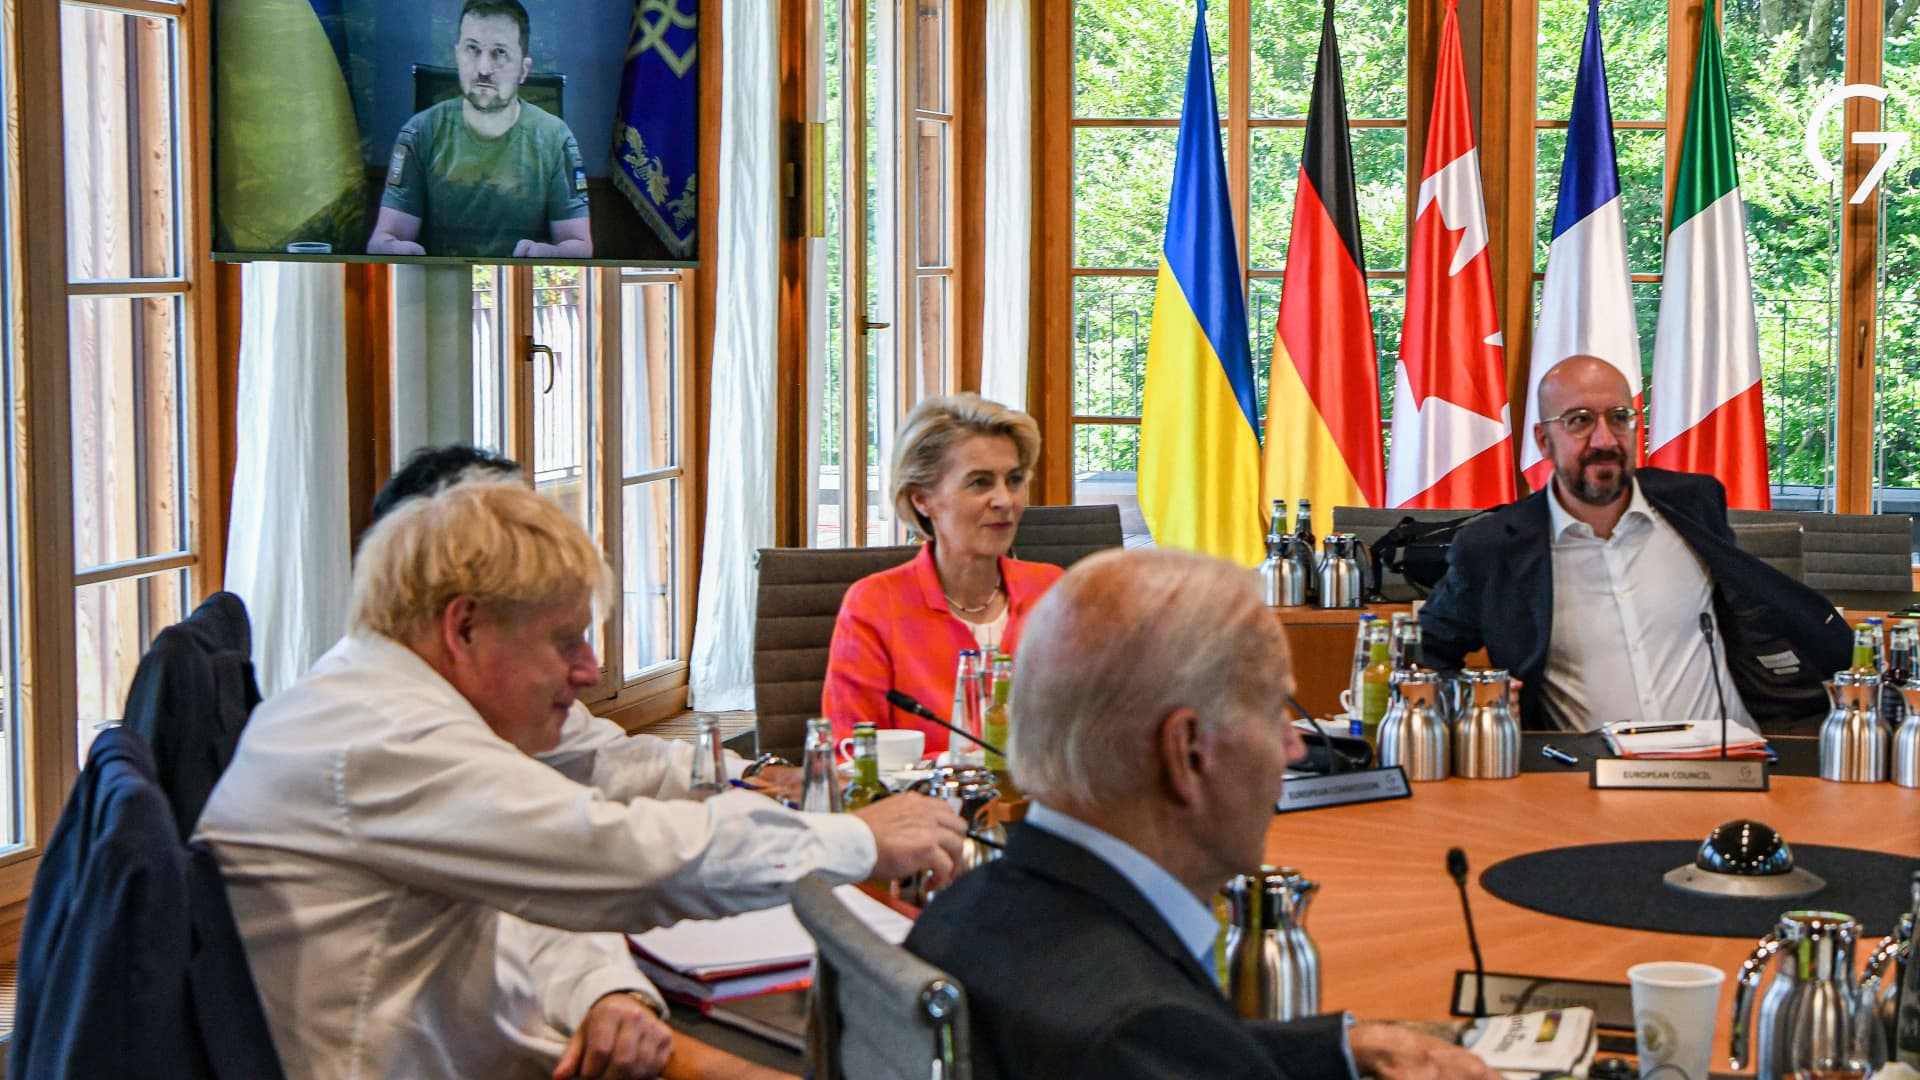 From left to right: Britain's Prime Minister Boris Johnson, European Commission President Ursula von der Leyen, US President Joe Biden and European Council President Charles Michel have taken seat at a round table on June 27, 2022 at Elmau Castle, southern Germany.